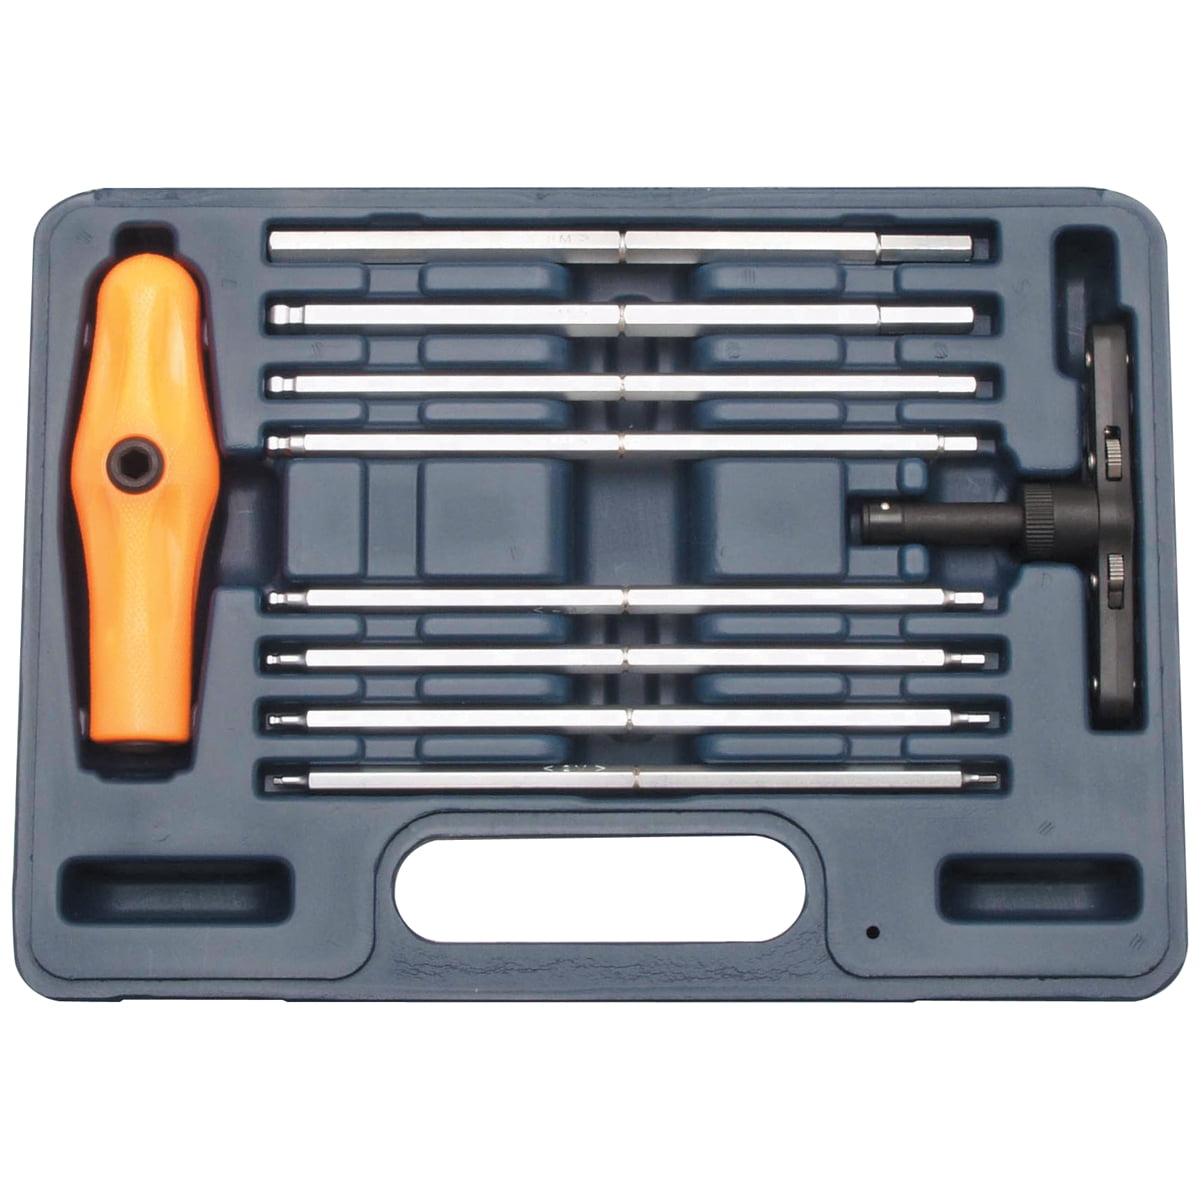 New 31 Piece Ratcheting T Handle Set Allen Wrench Hex Key Metric Tool Kit SAE